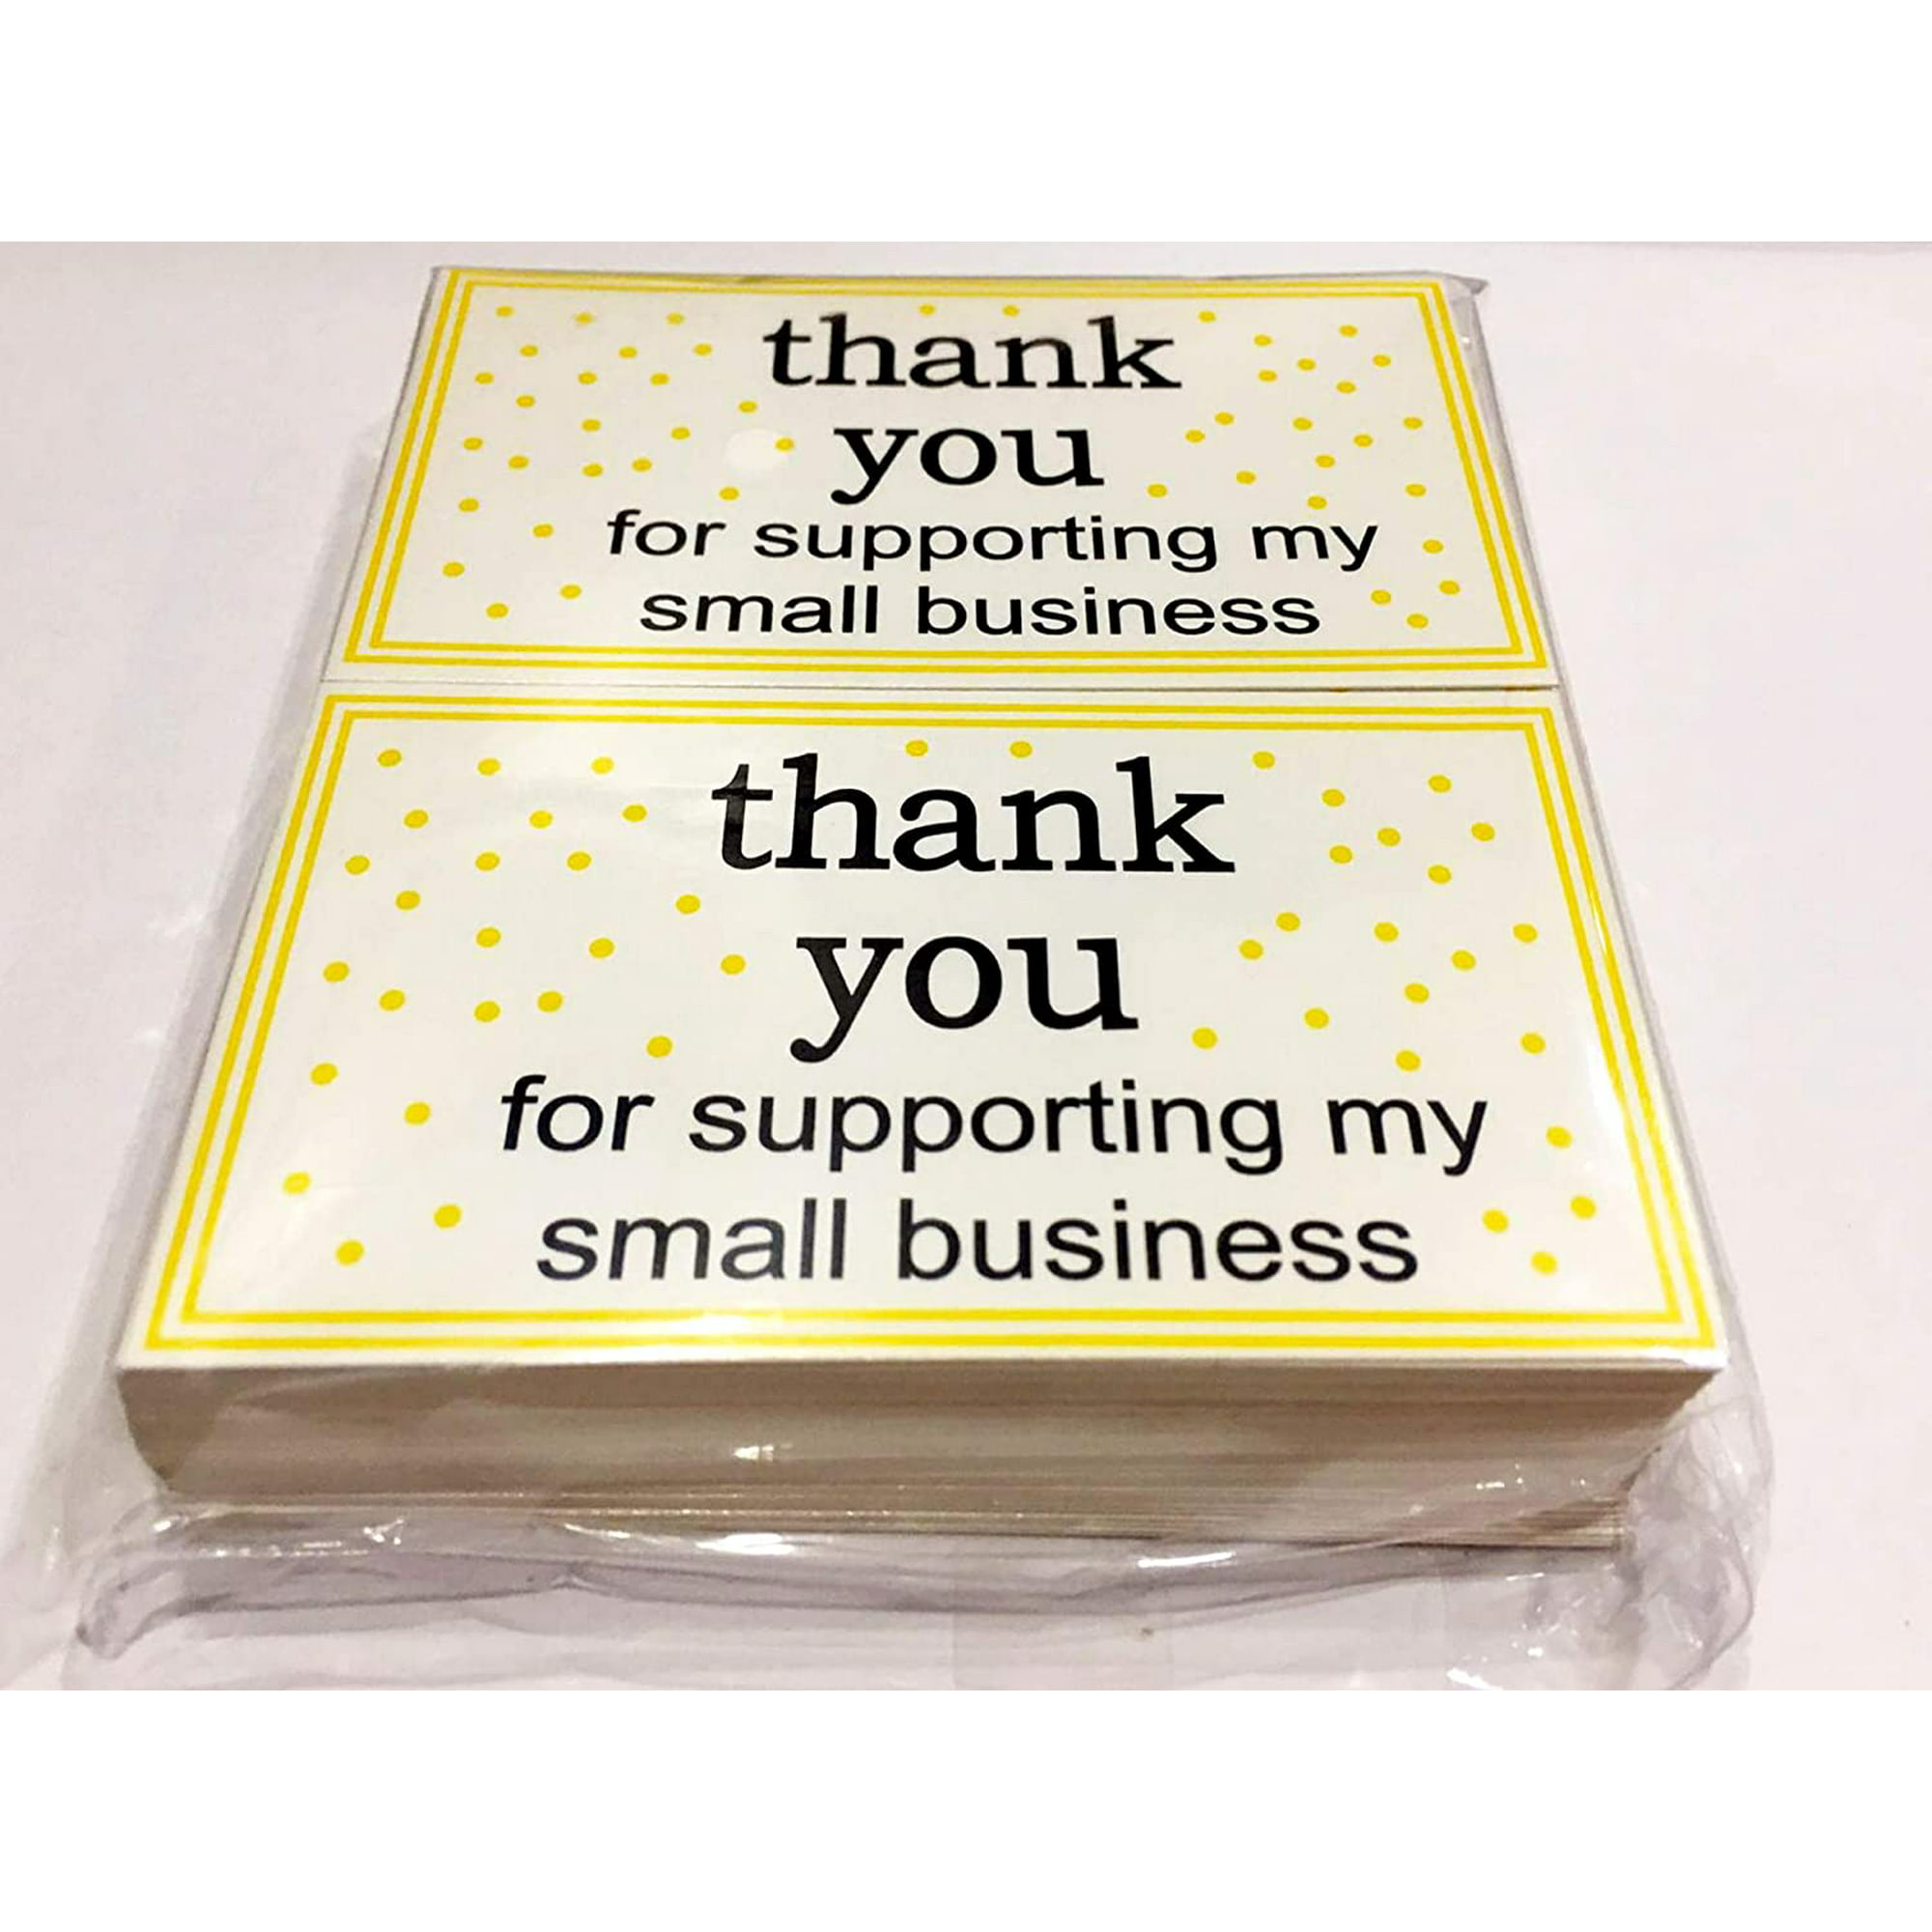 ORMAT Thank you cards small business 2/”x3.5/” thank you for supporting my small business cards premium quality and design thank you business cards 100 pack